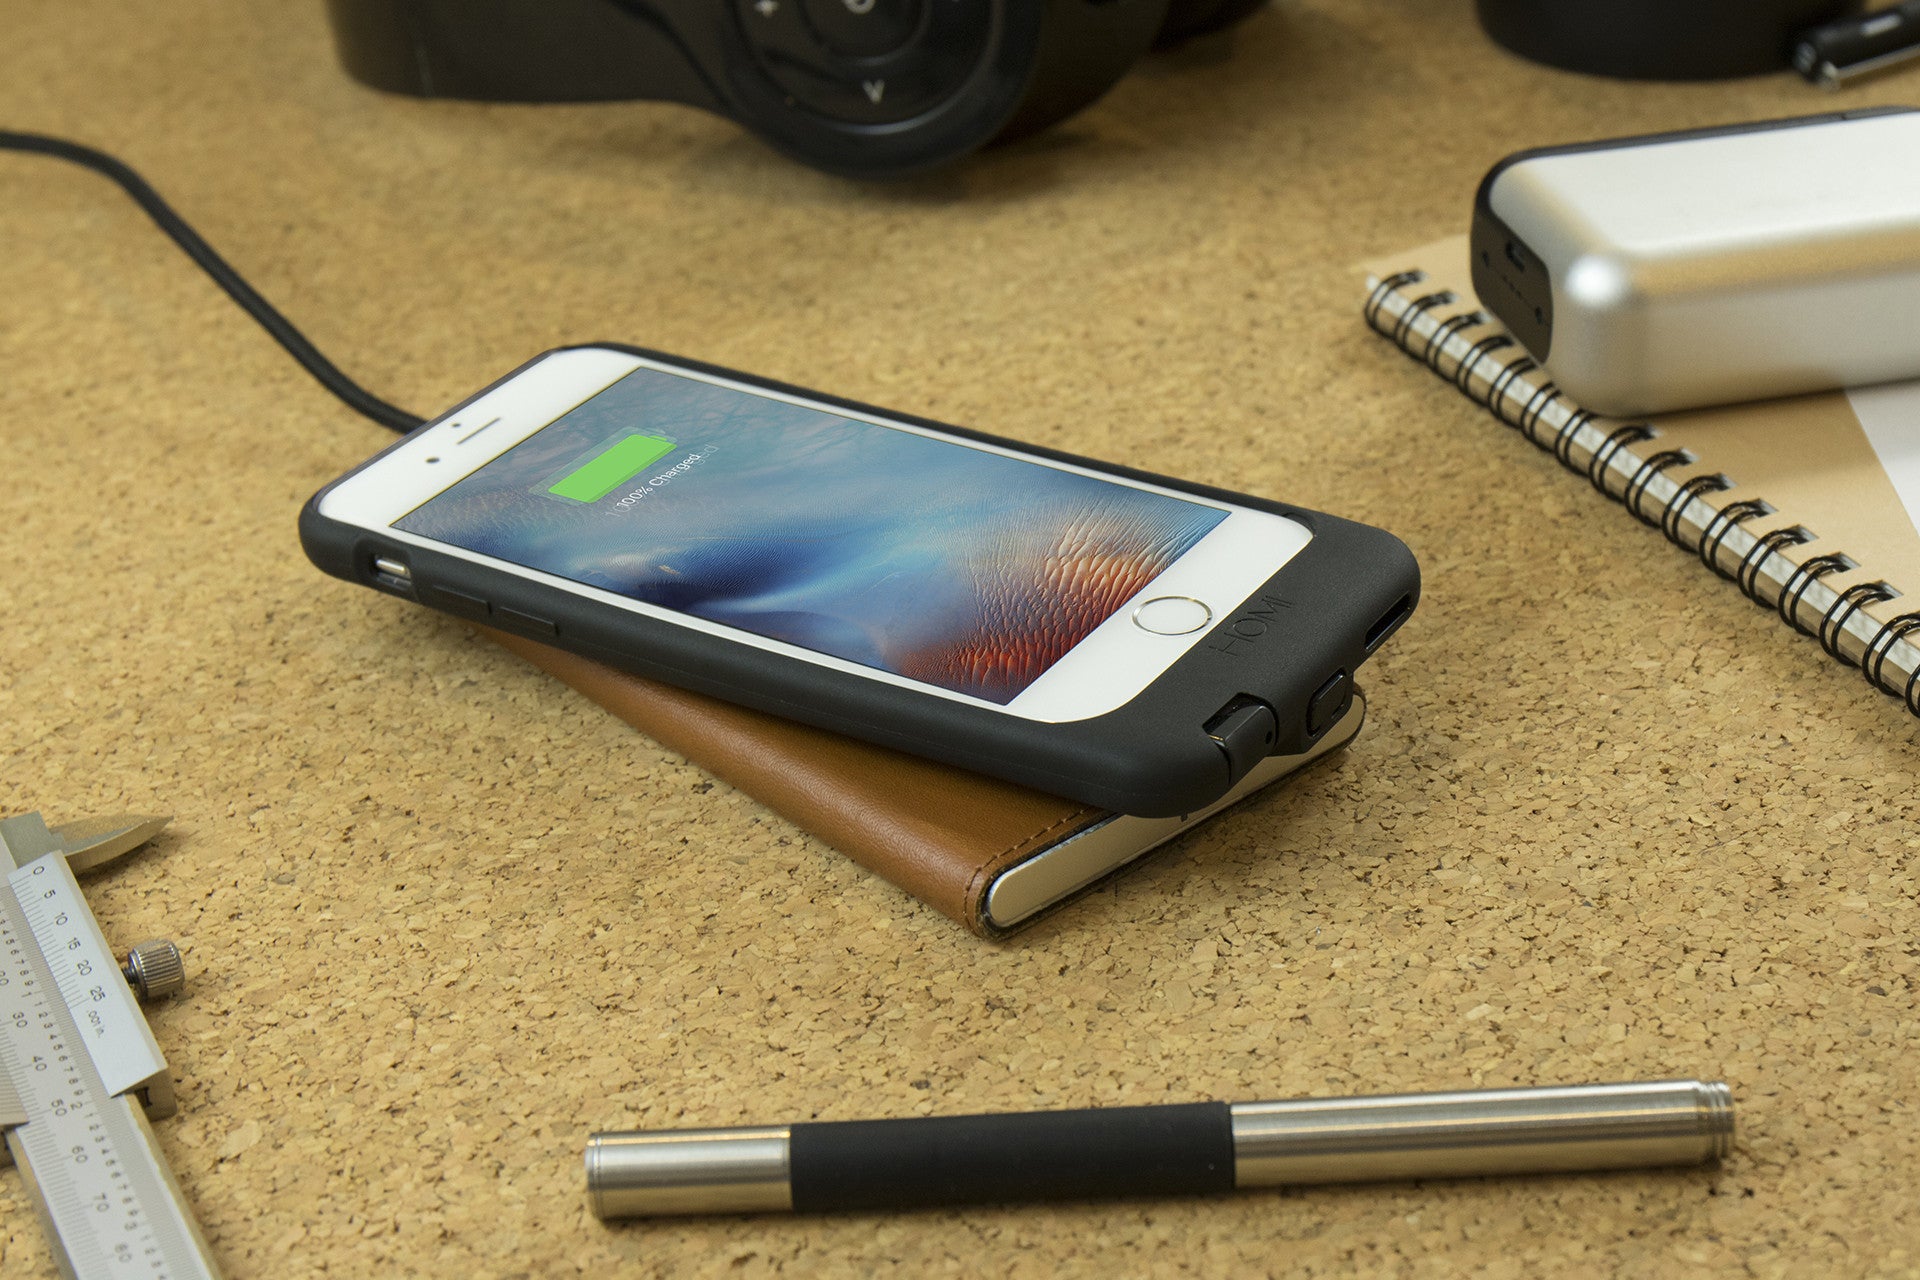 HOMI - Charging should be easy, wireless and untangled - LeatherDock